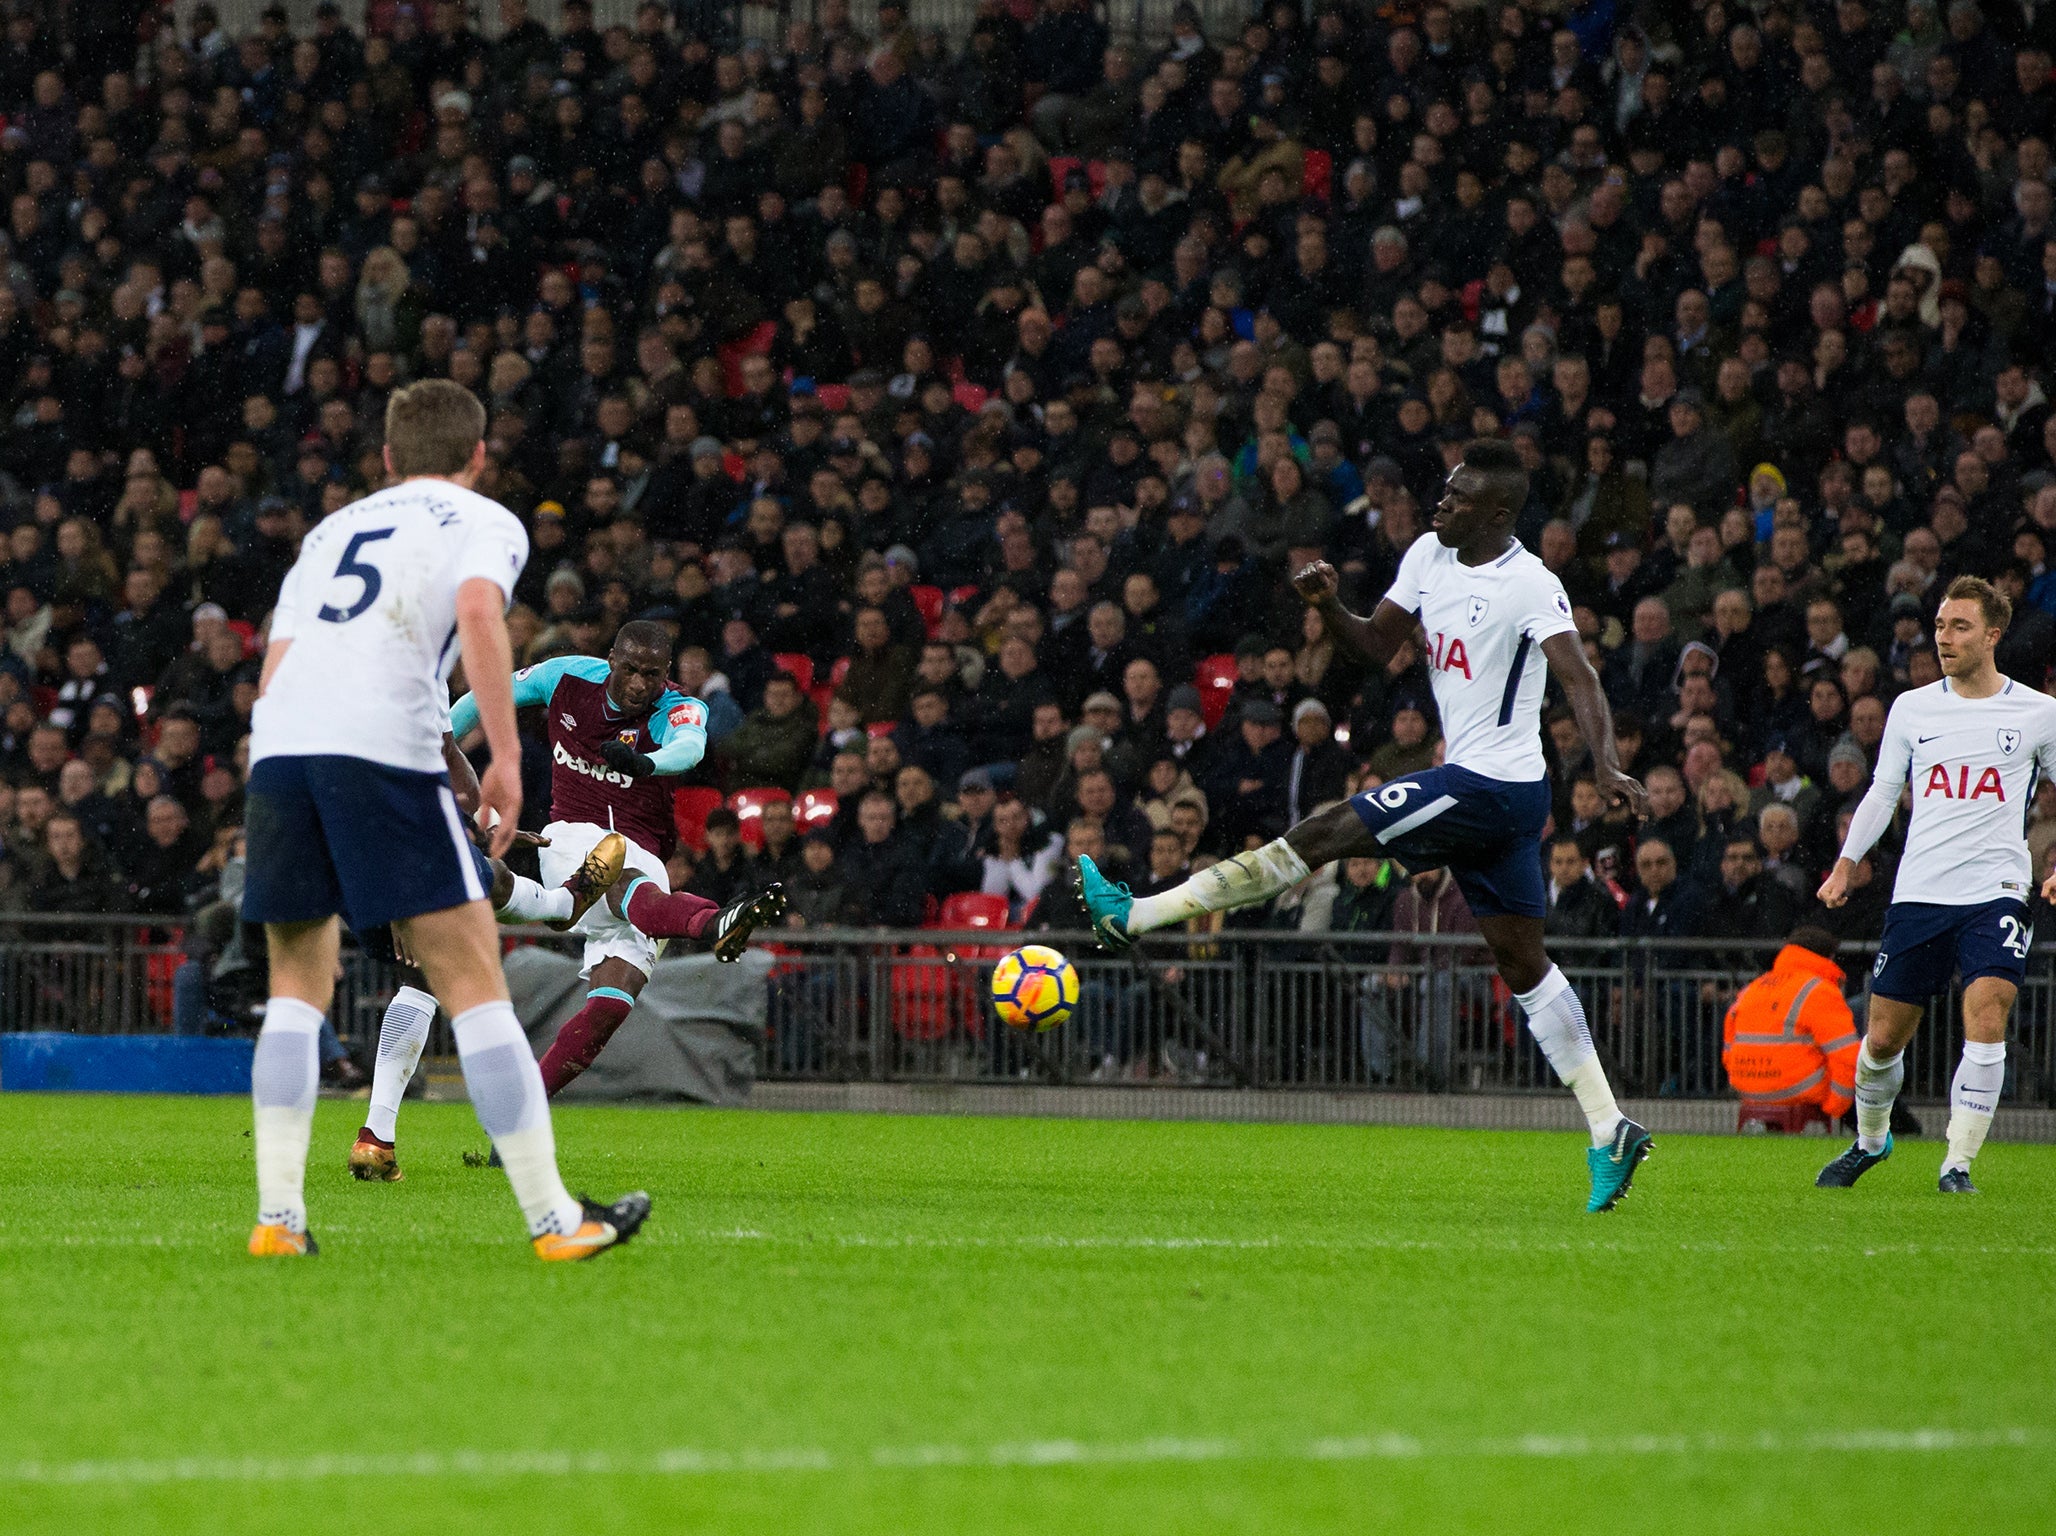 Pedro Obiang opened the scoring with a stunning long-range strike